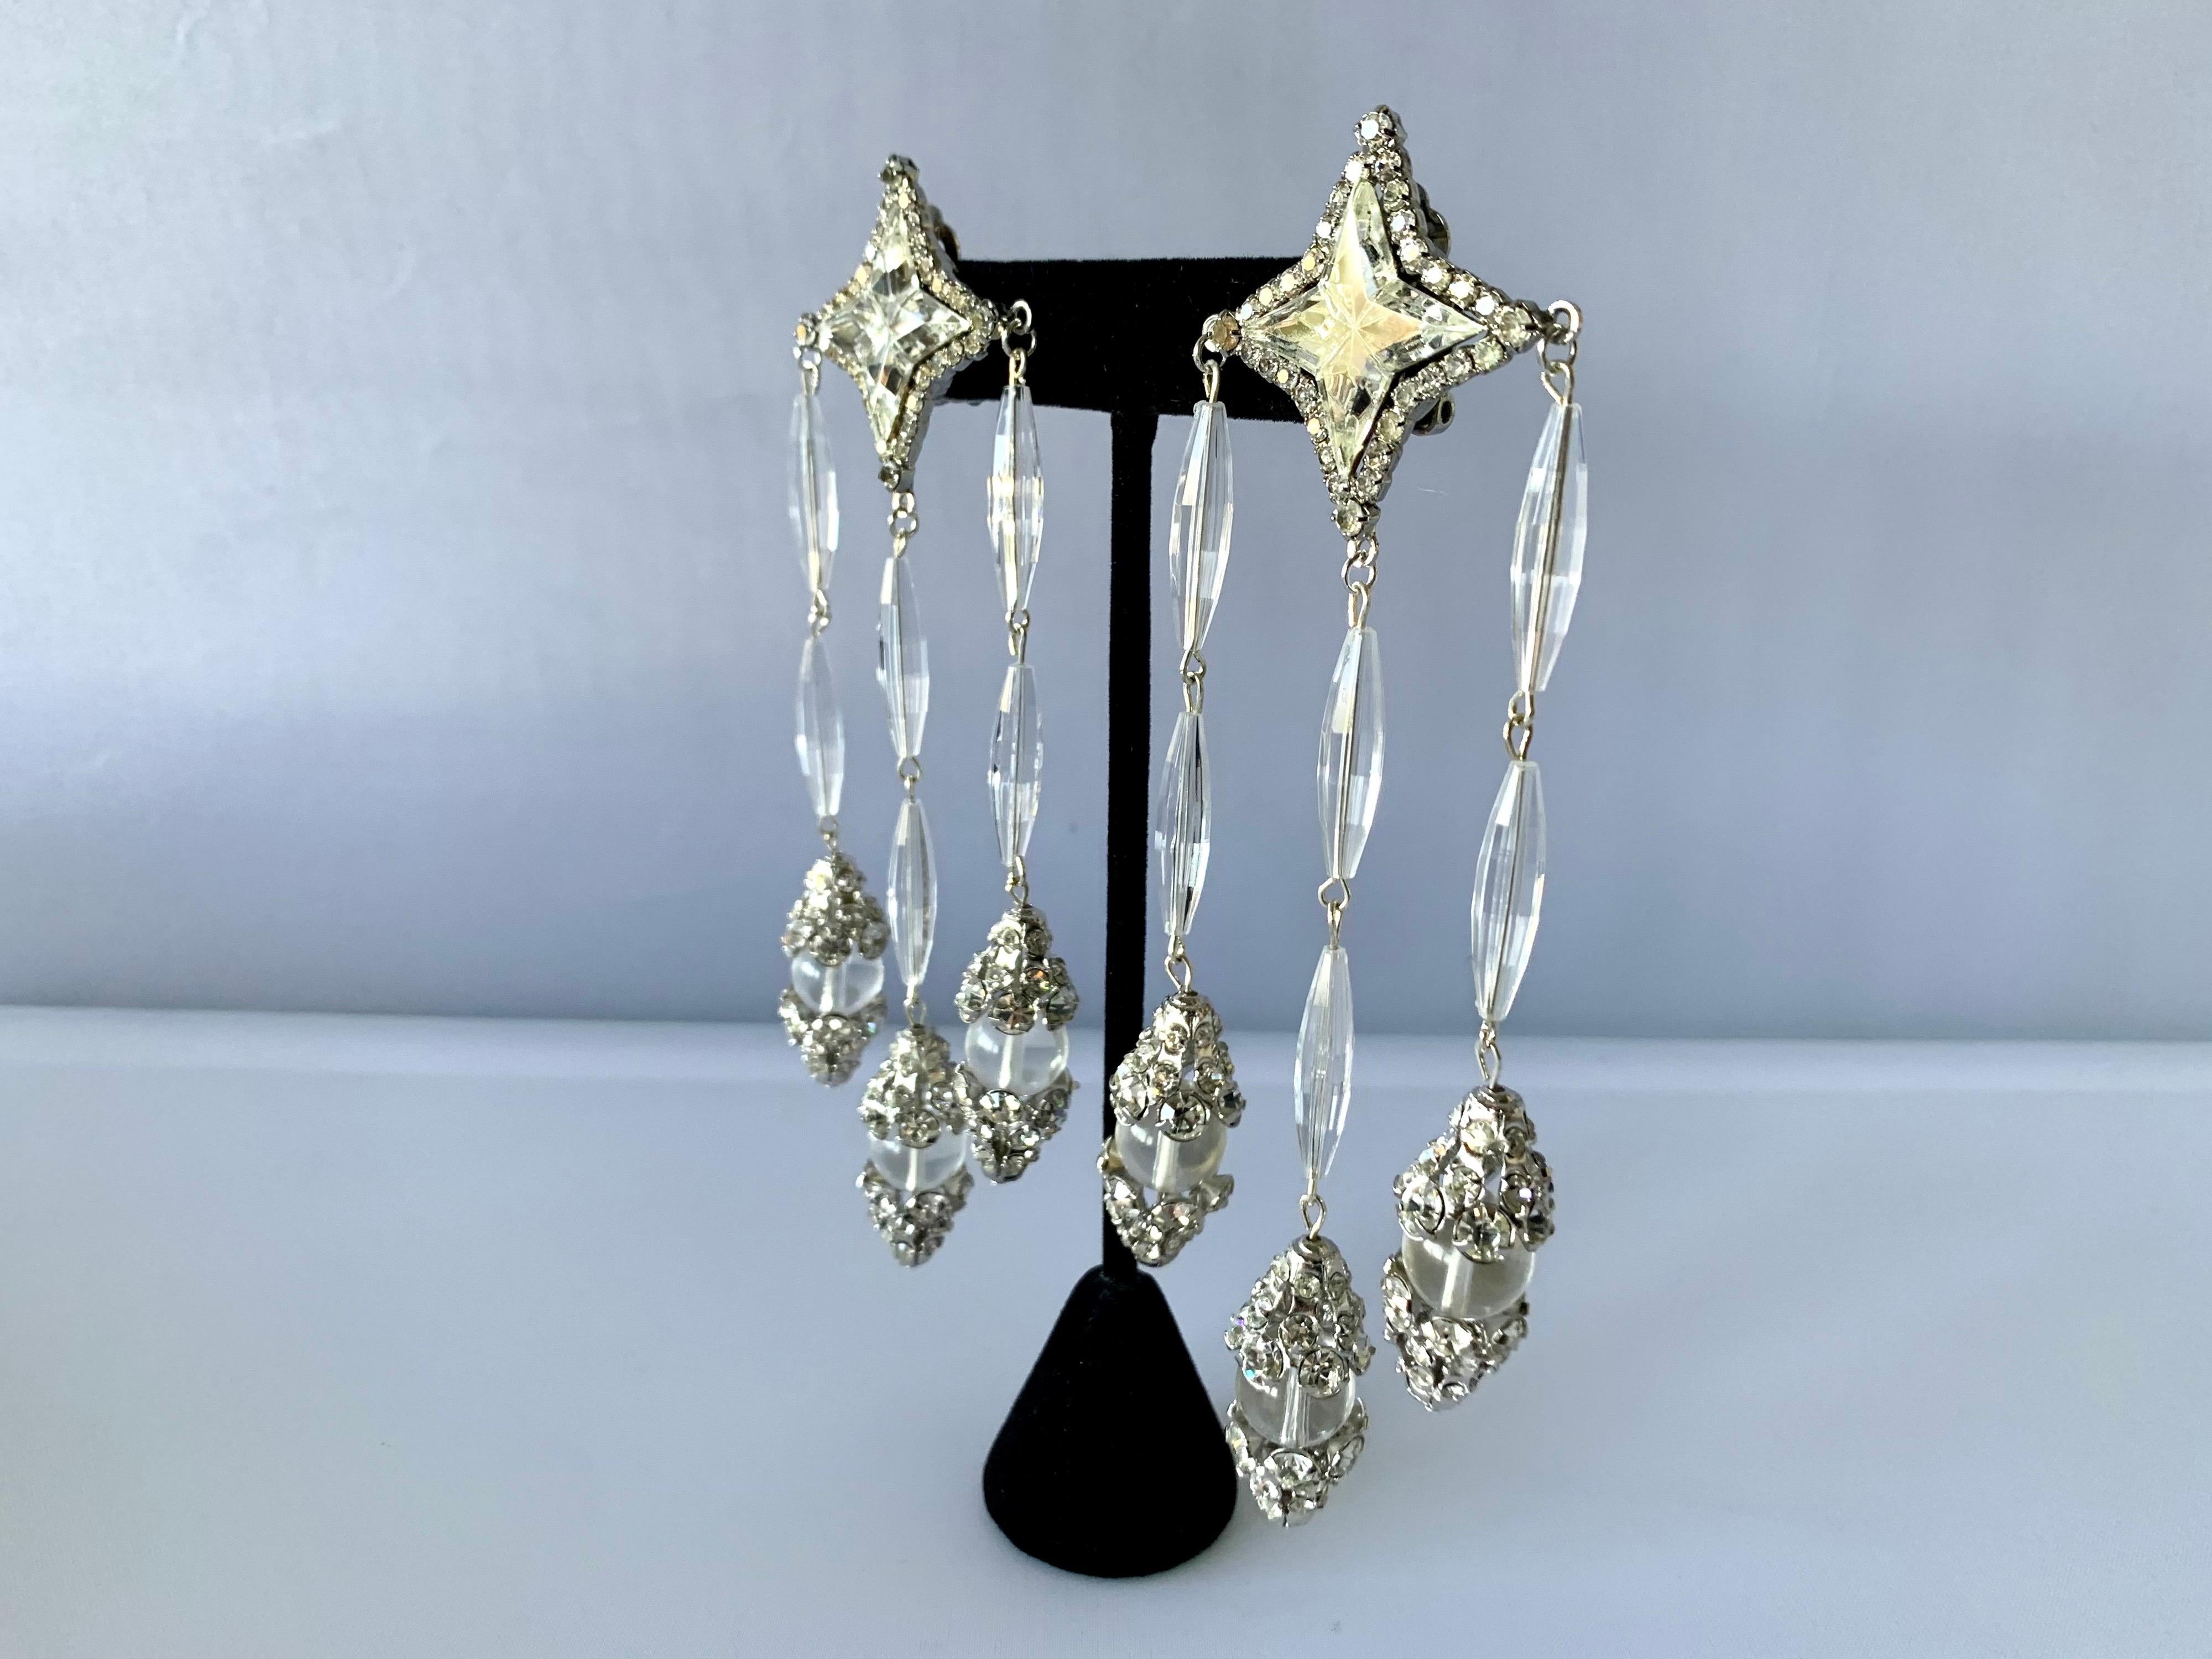 Exceptional imposing vintage William de Lillo star chandelier clip-on statement earrings. Comprised out of clear acrylic faceted beads, Swarovski glass rhinestones, and German navette glass rhinestones - hand constructed by Robert F. Clark for